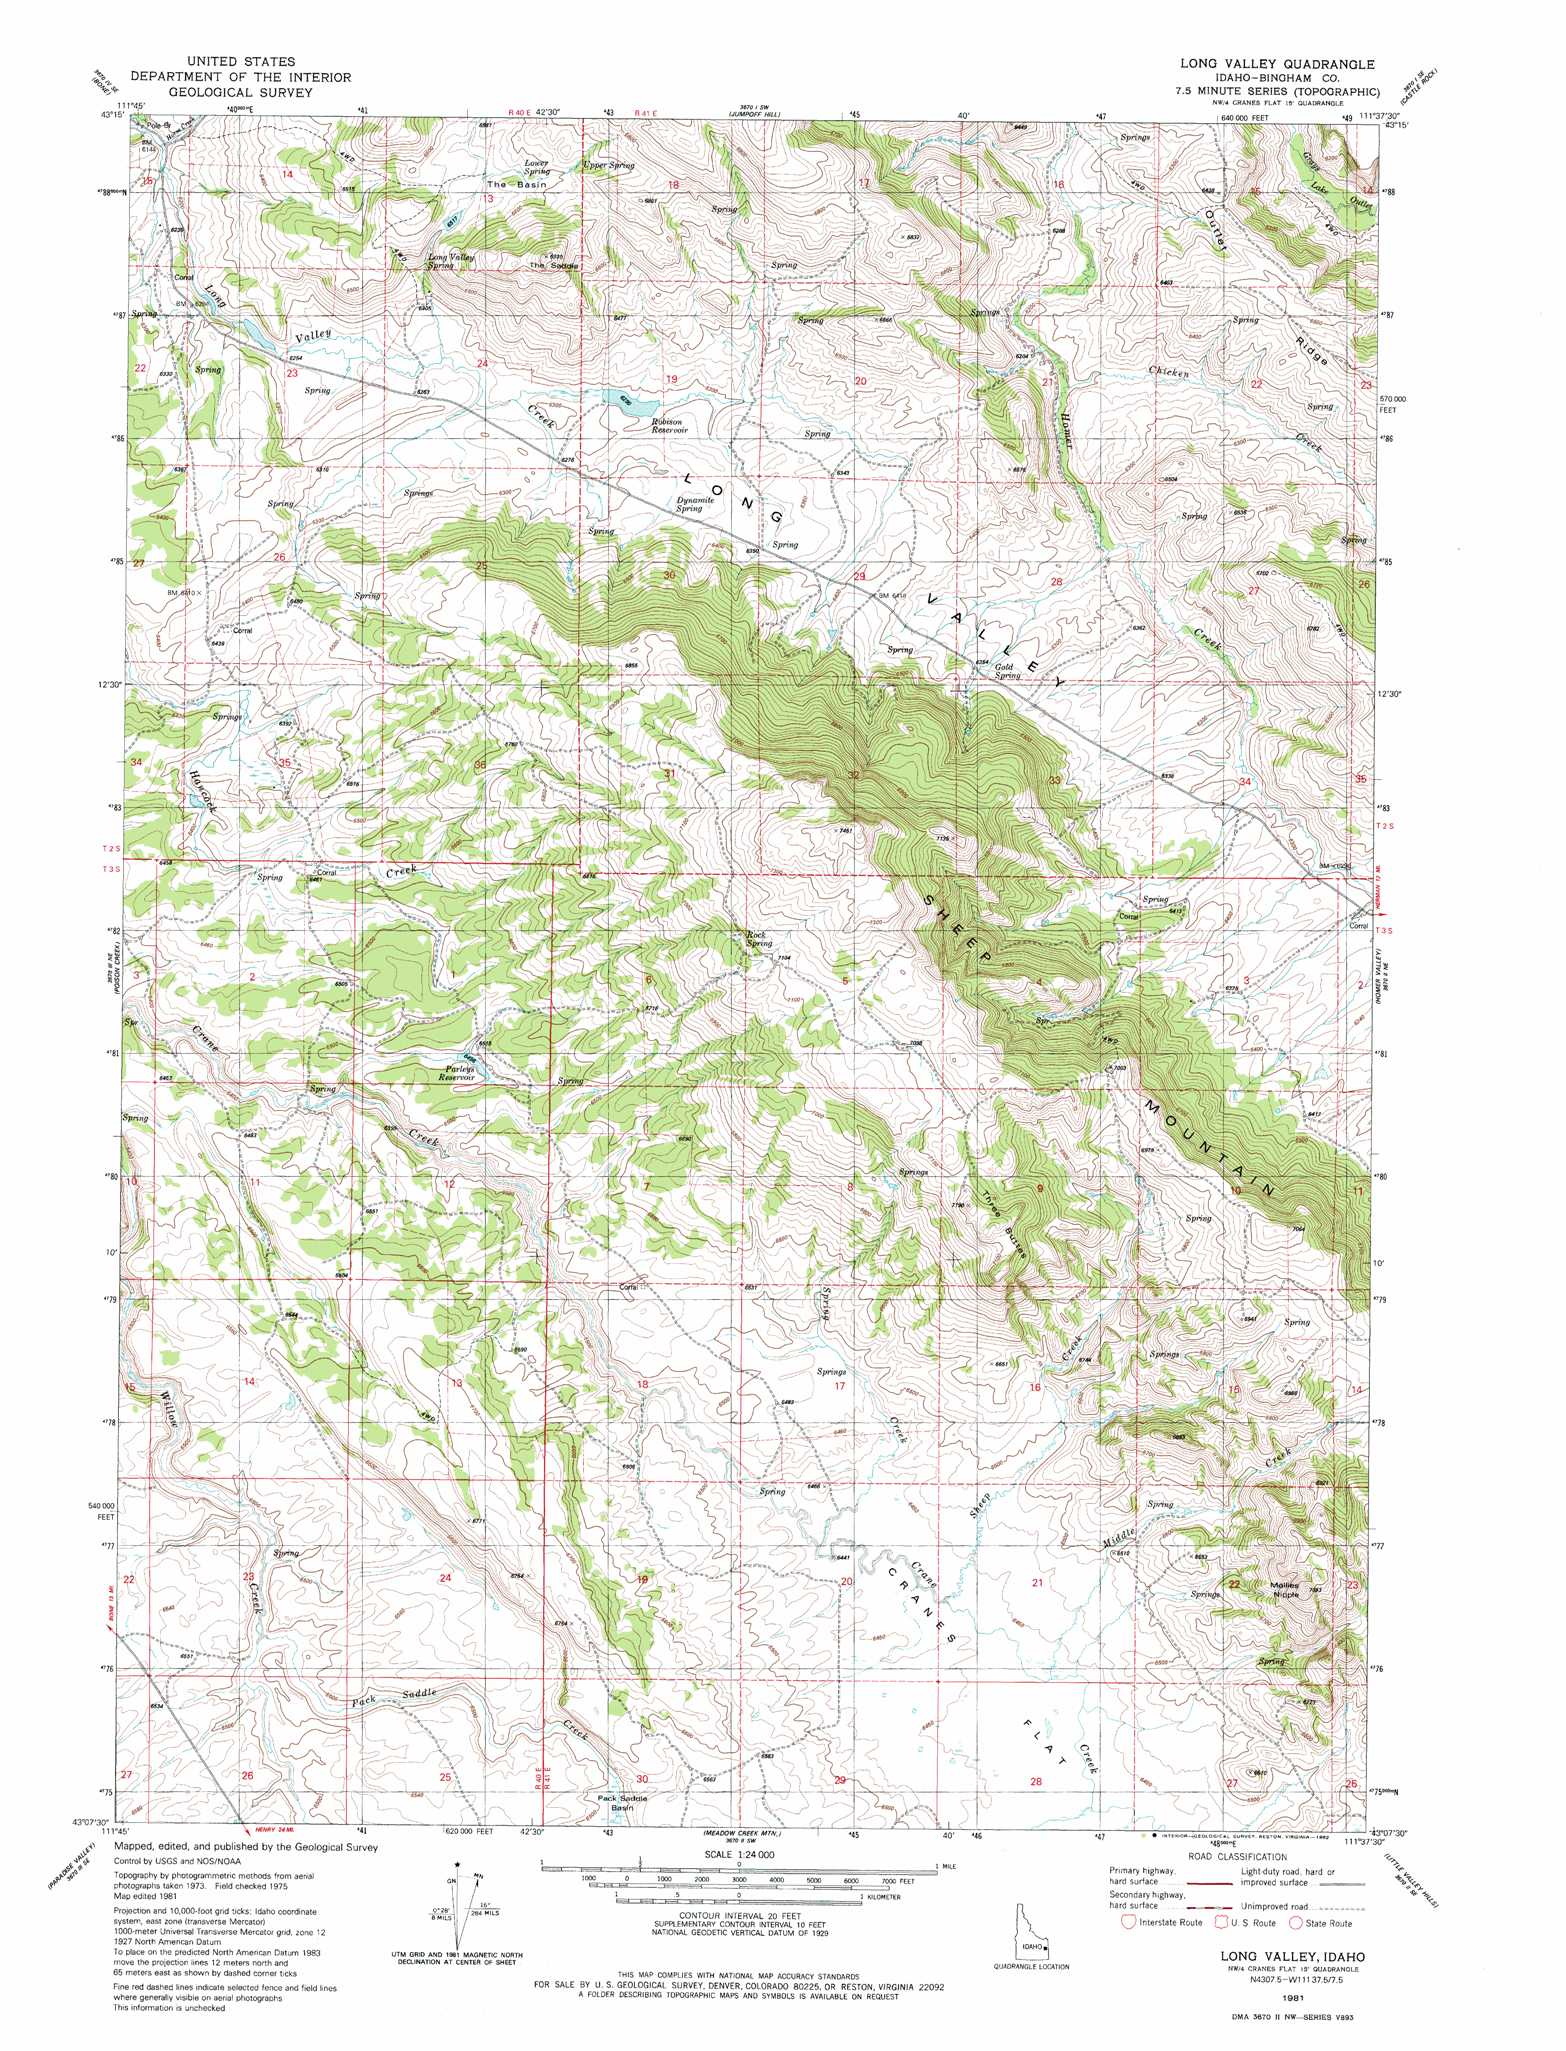 Long Valley topographic map 1:24,000 scale, Idaho